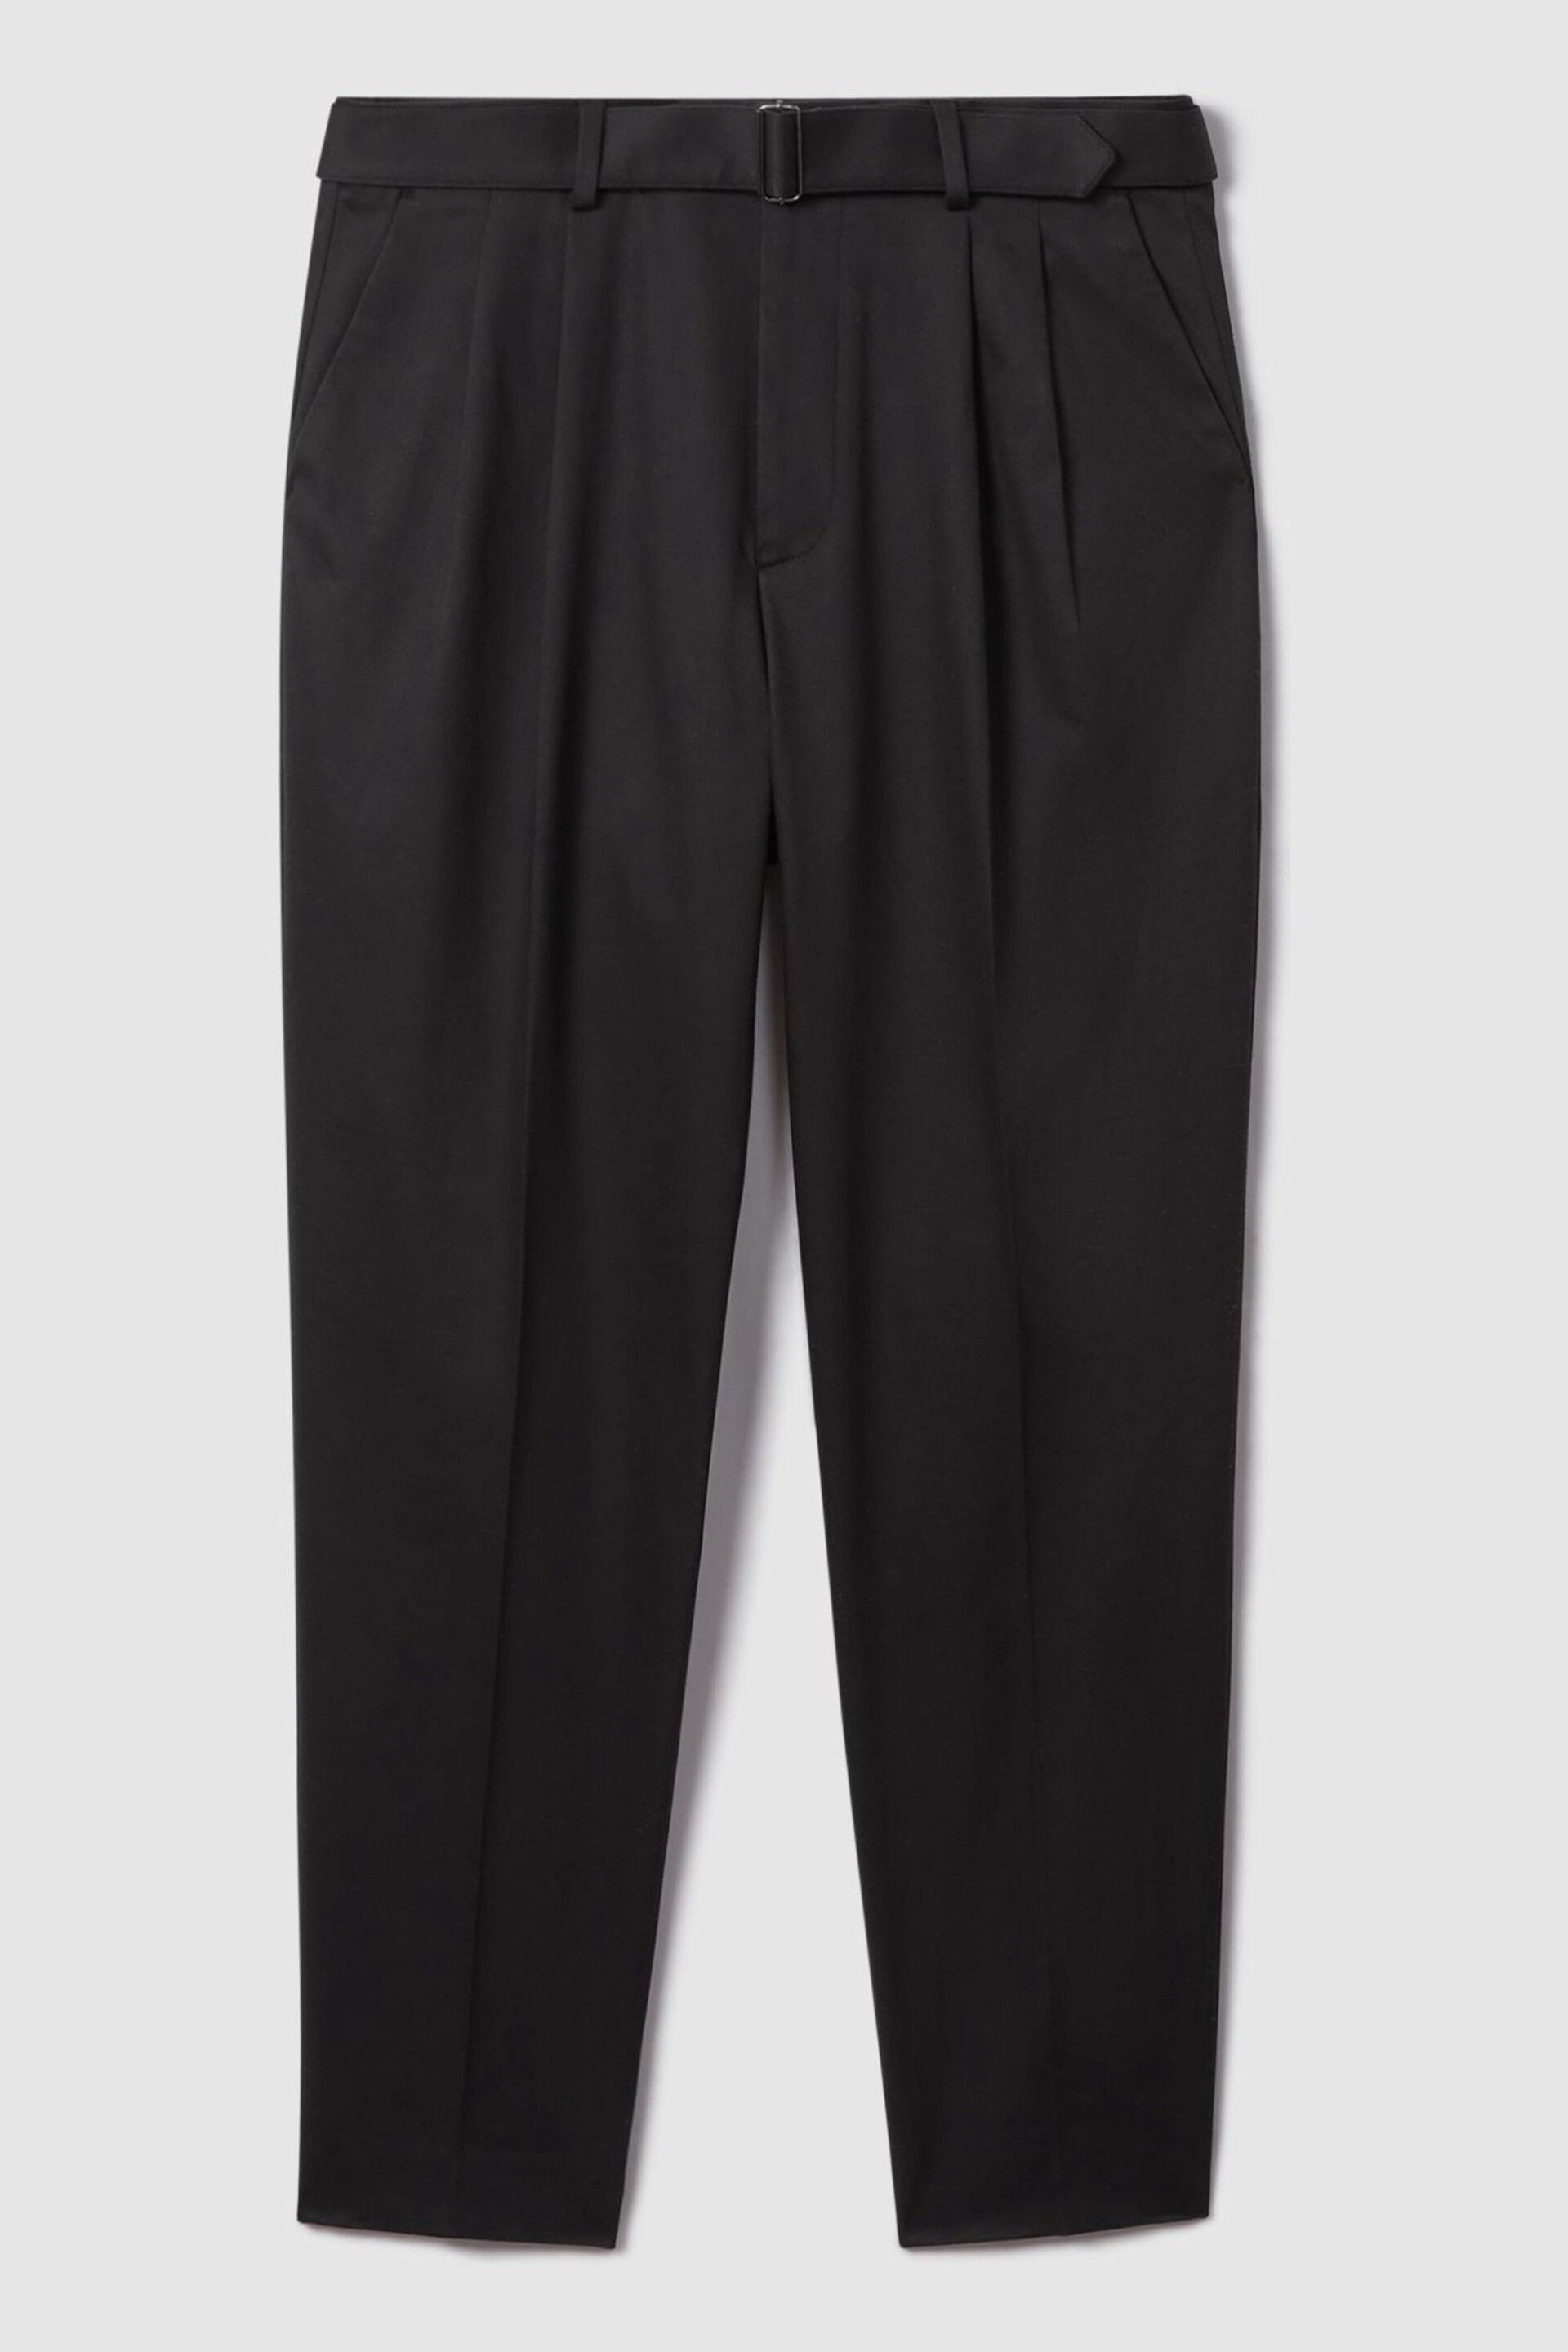 Reiss Black Liquid Relaxed Tapered Belted Trousers - Image 2 of 5